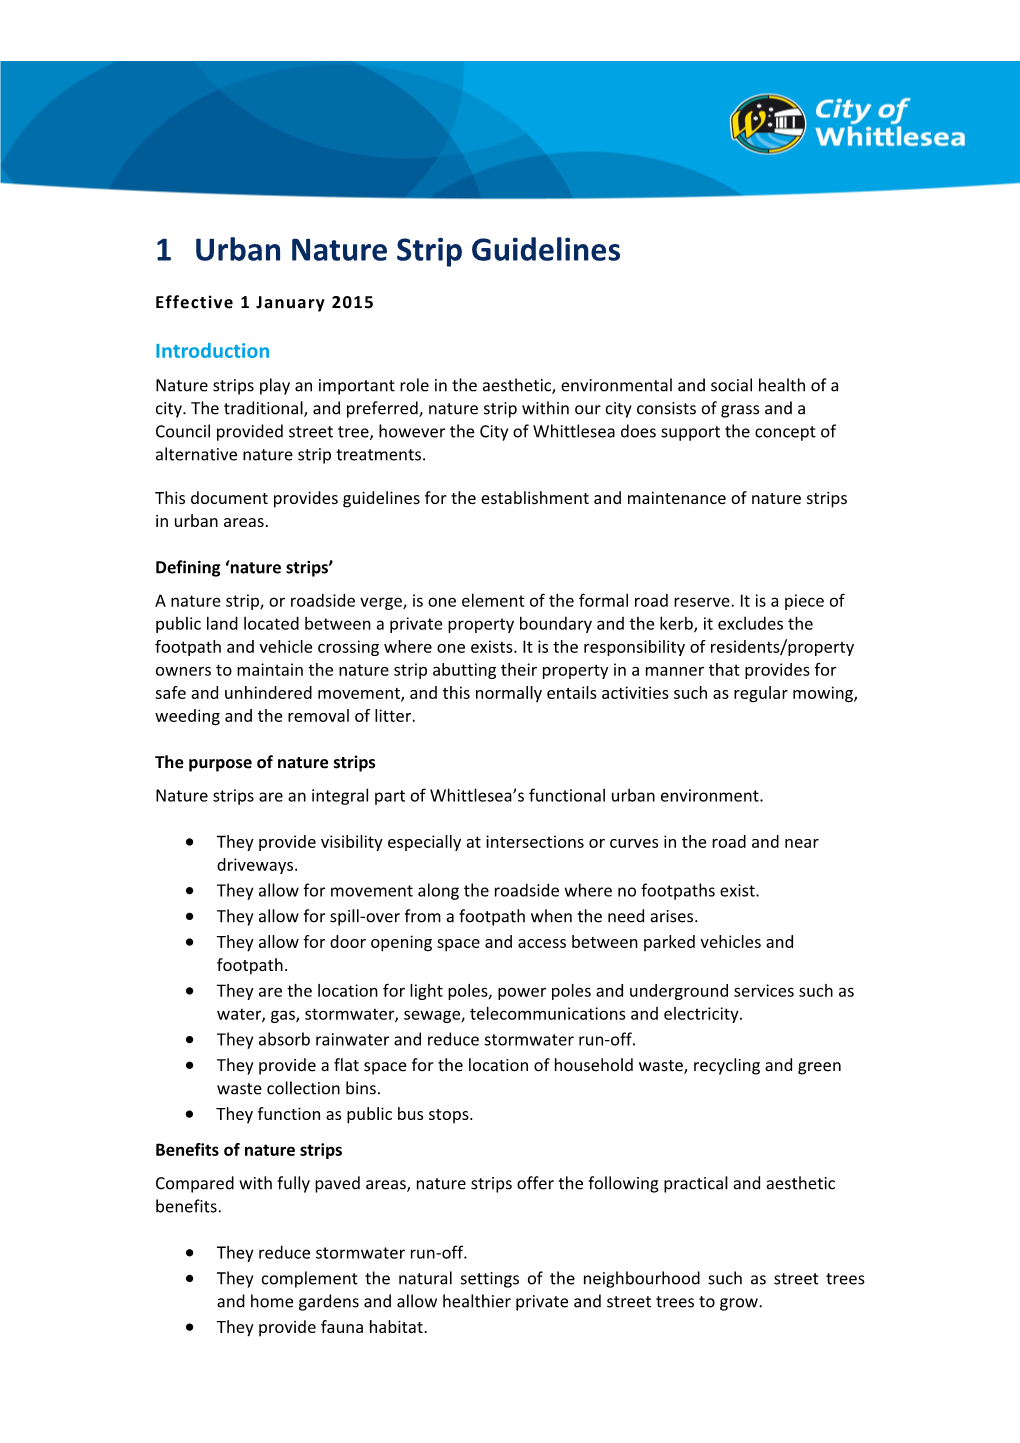 Urban Nature Strip Guidelines